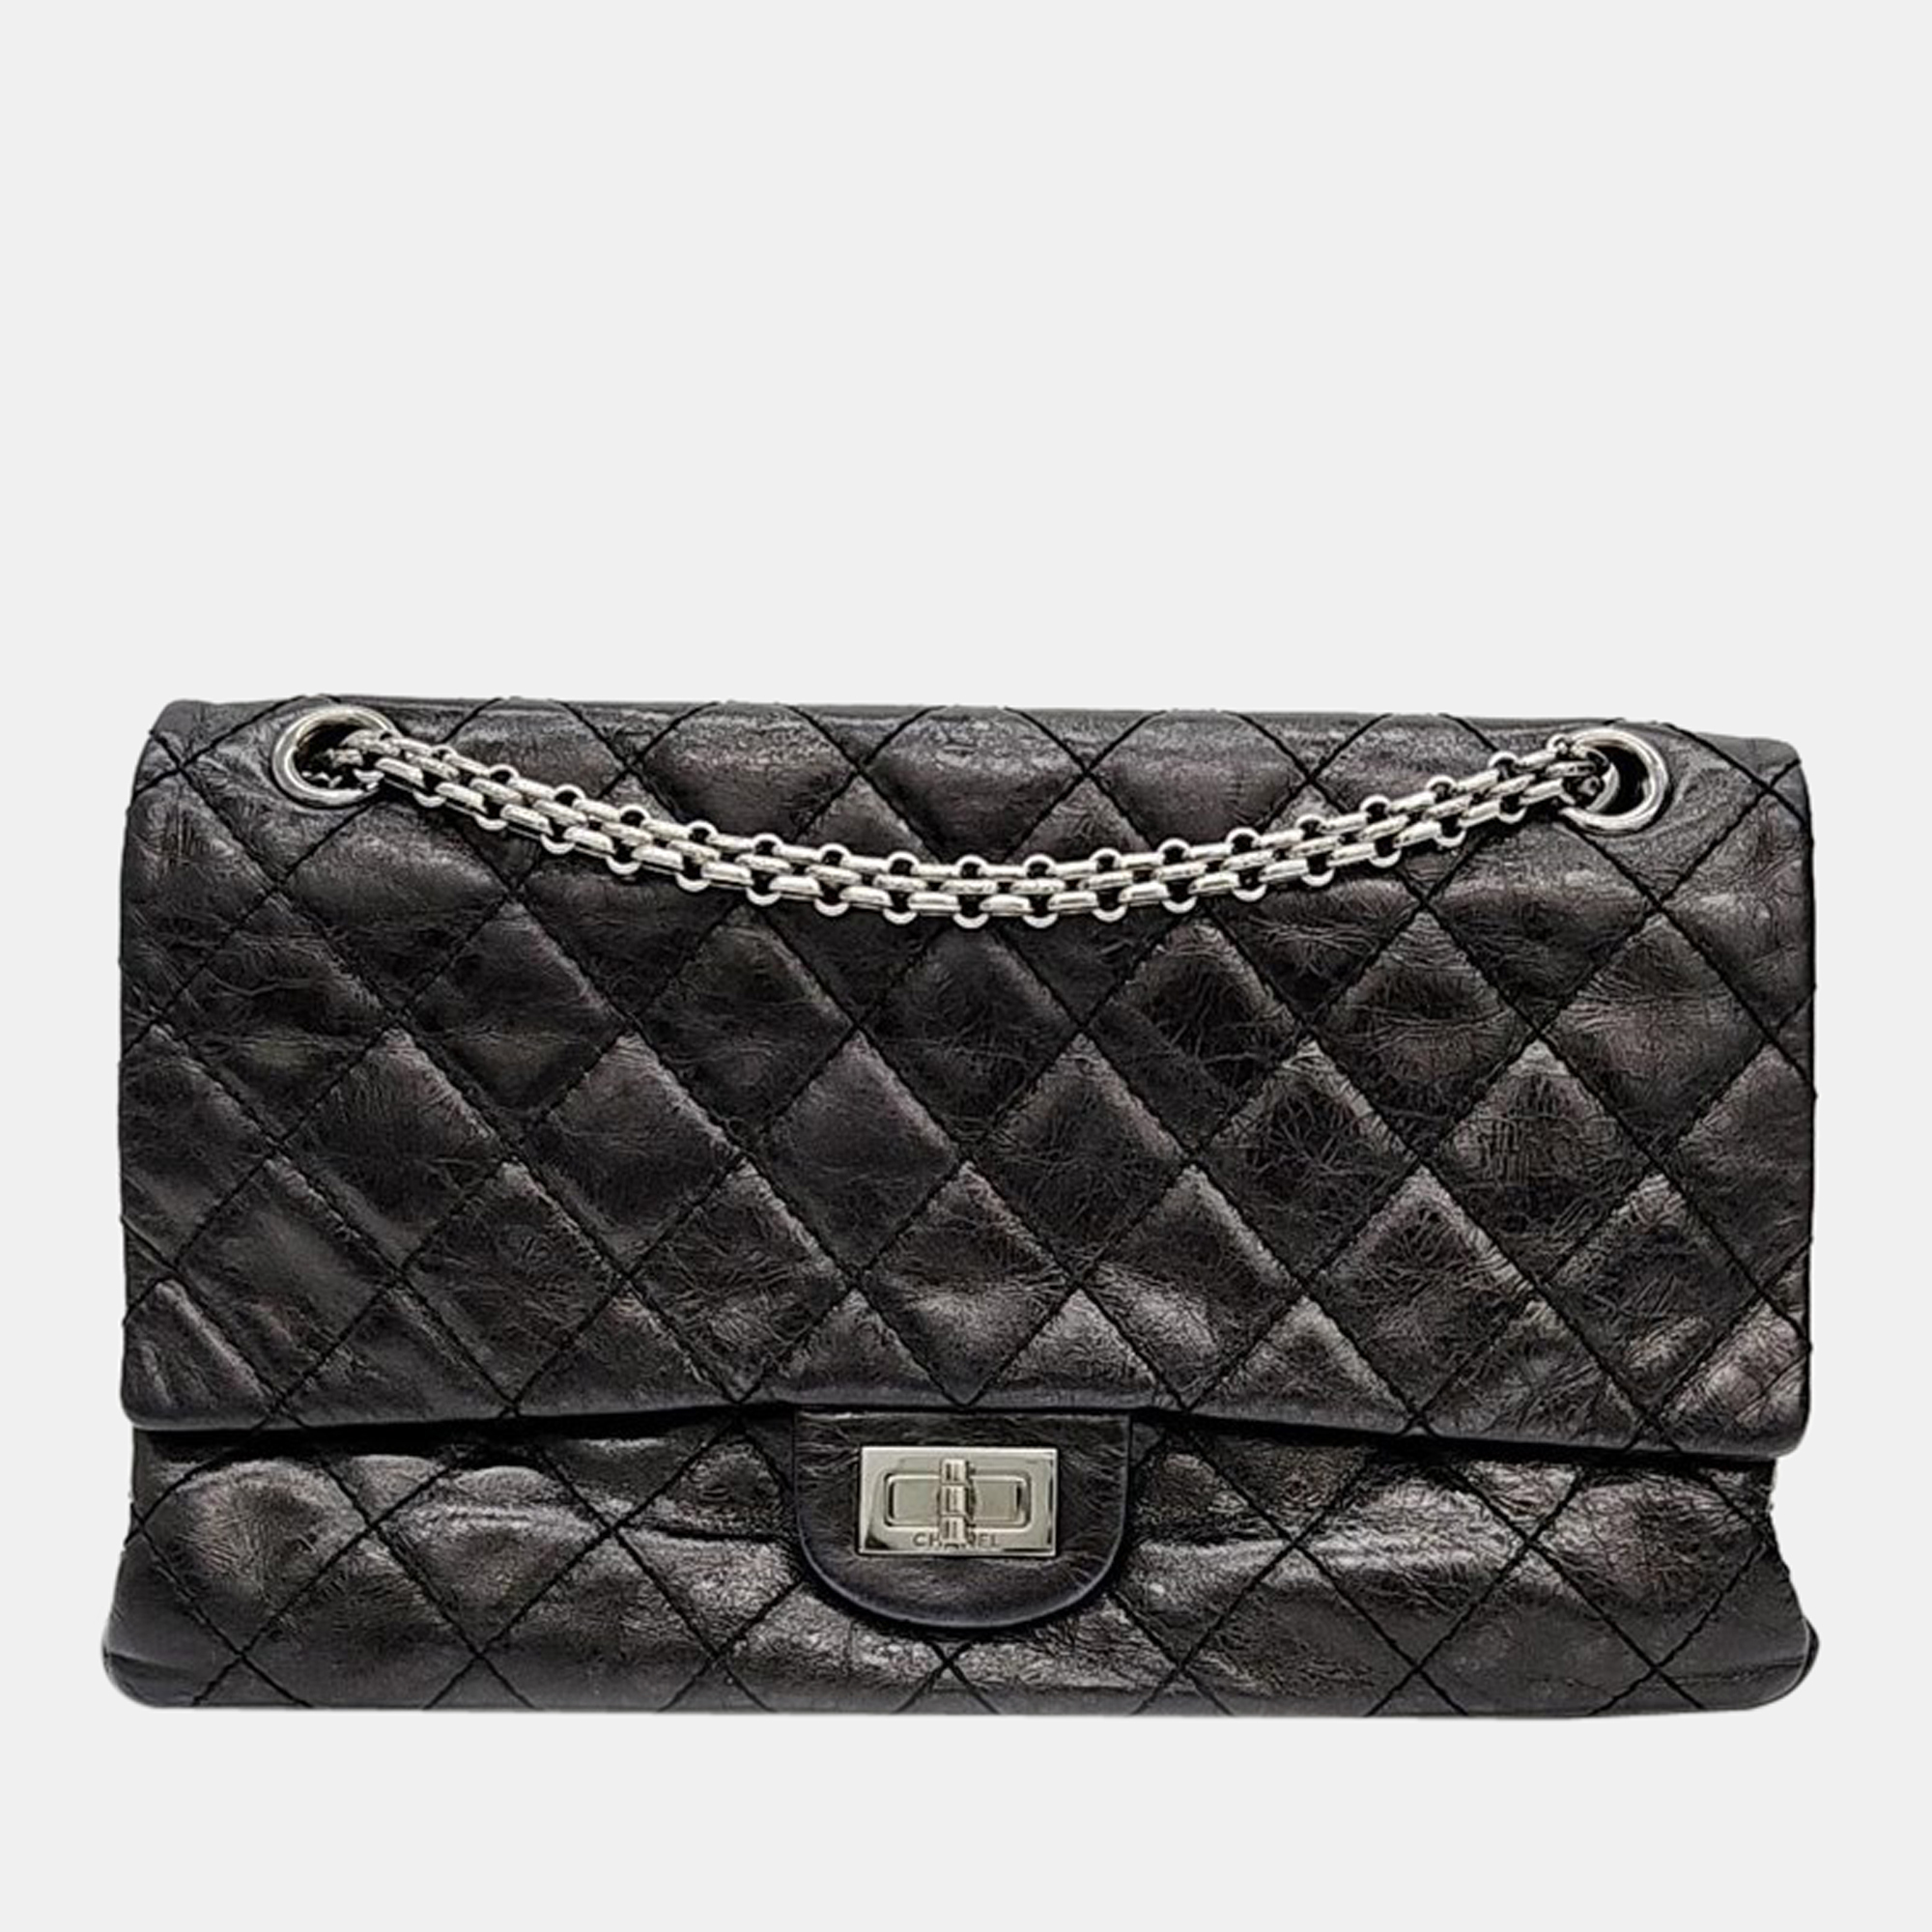 Chanel leather 2.55 reissue flap bag